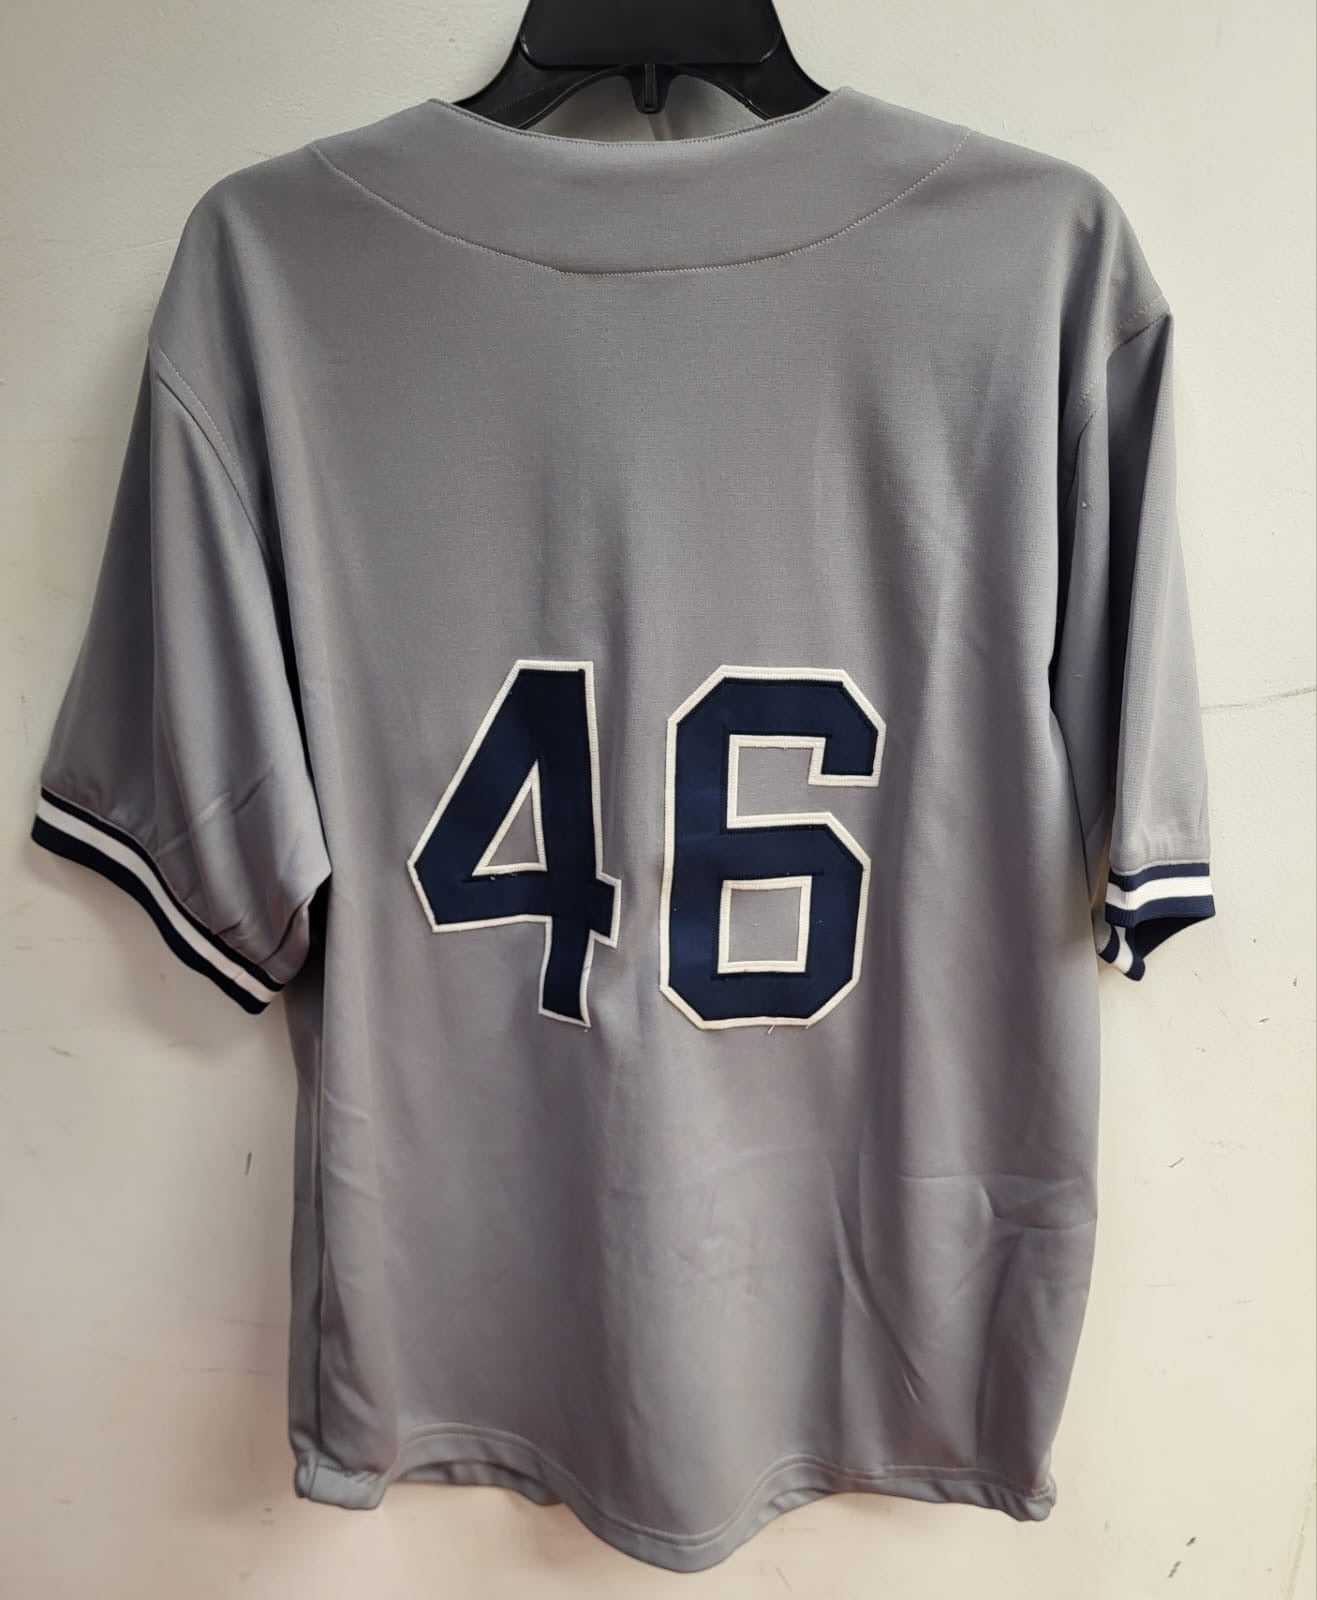 andy pettitte signed jersey